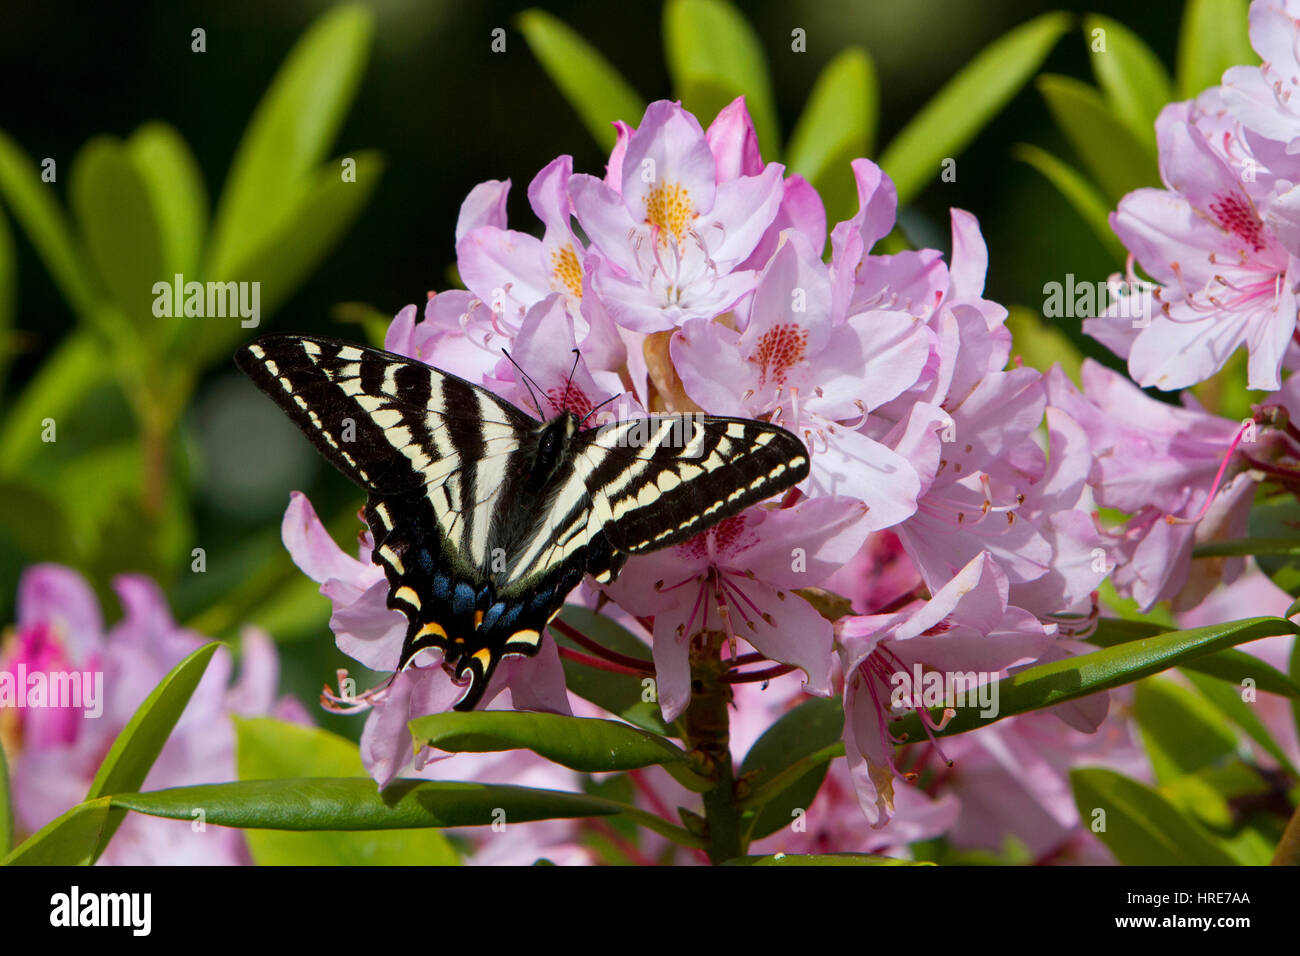 Western Tiger Swallowtail (Papilio rutulus) butterfly pollinating a rhododendron flower in a garden in Nanaimo, Vancouver Island, BC, Canada Stock Photo